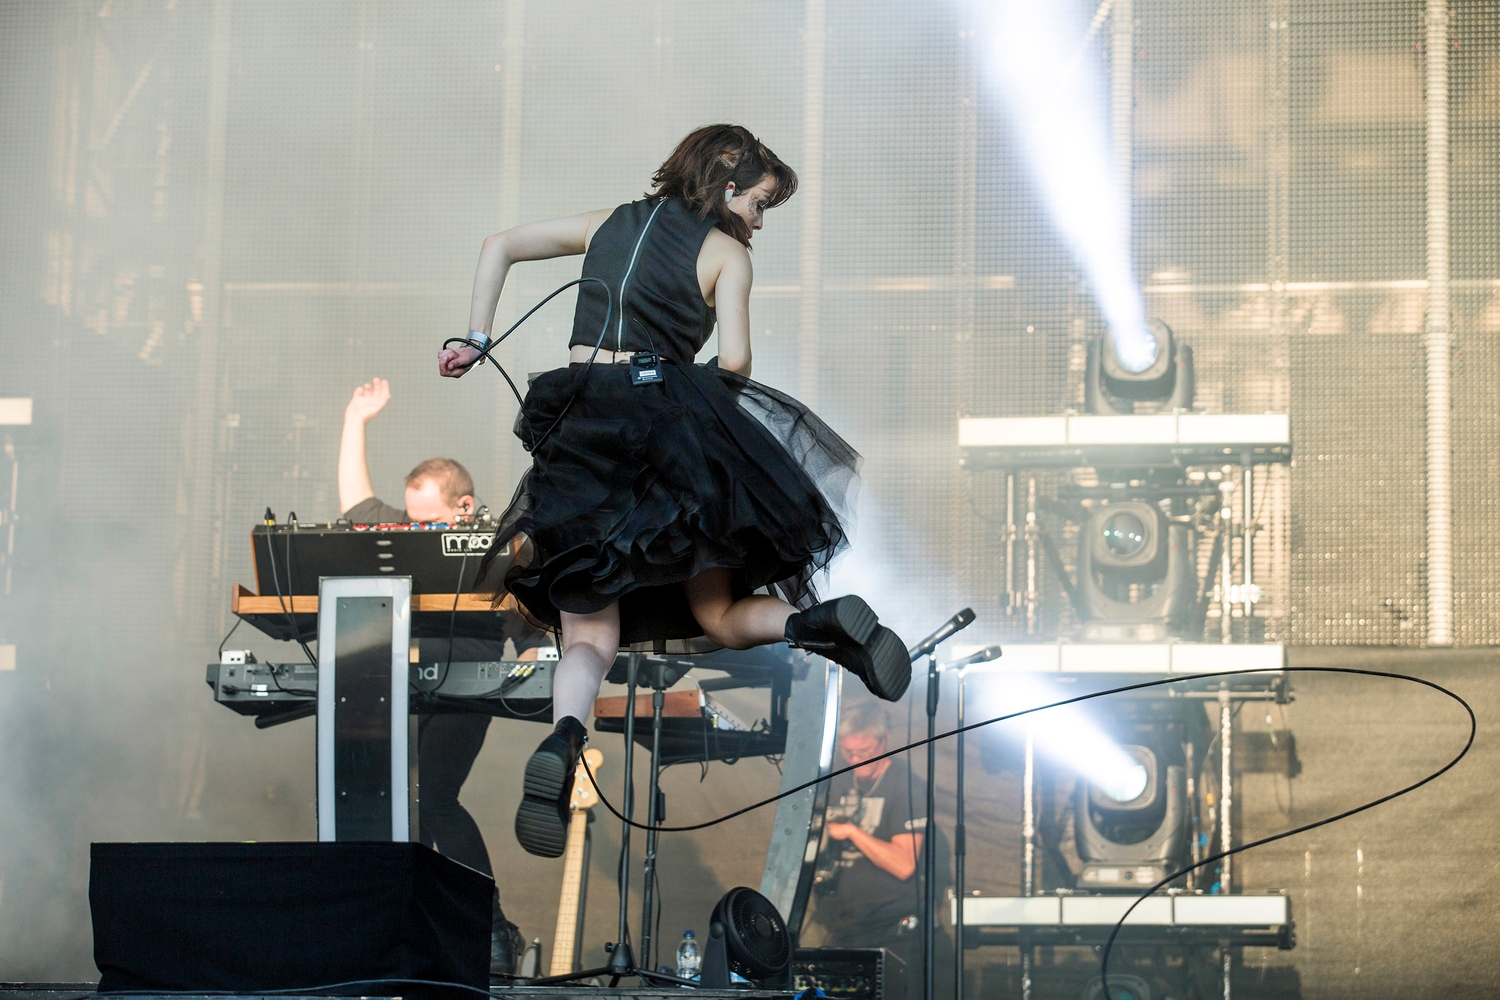 “RIP Harambe” - Chvrches offer thumping Reading 2016 set